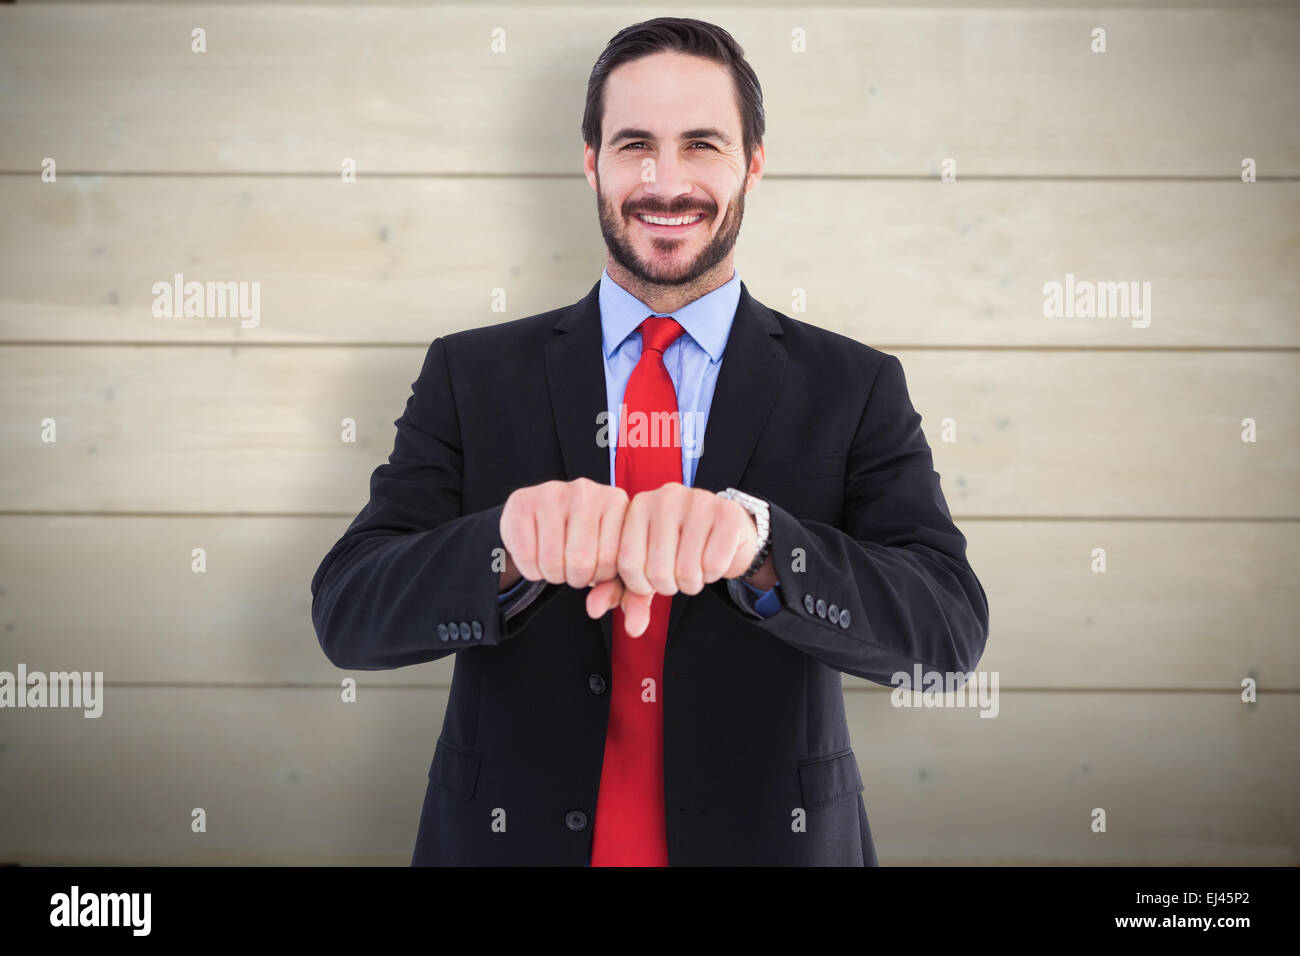 Composite image of smiling businessman with clenched fist in front of him Stock Photo